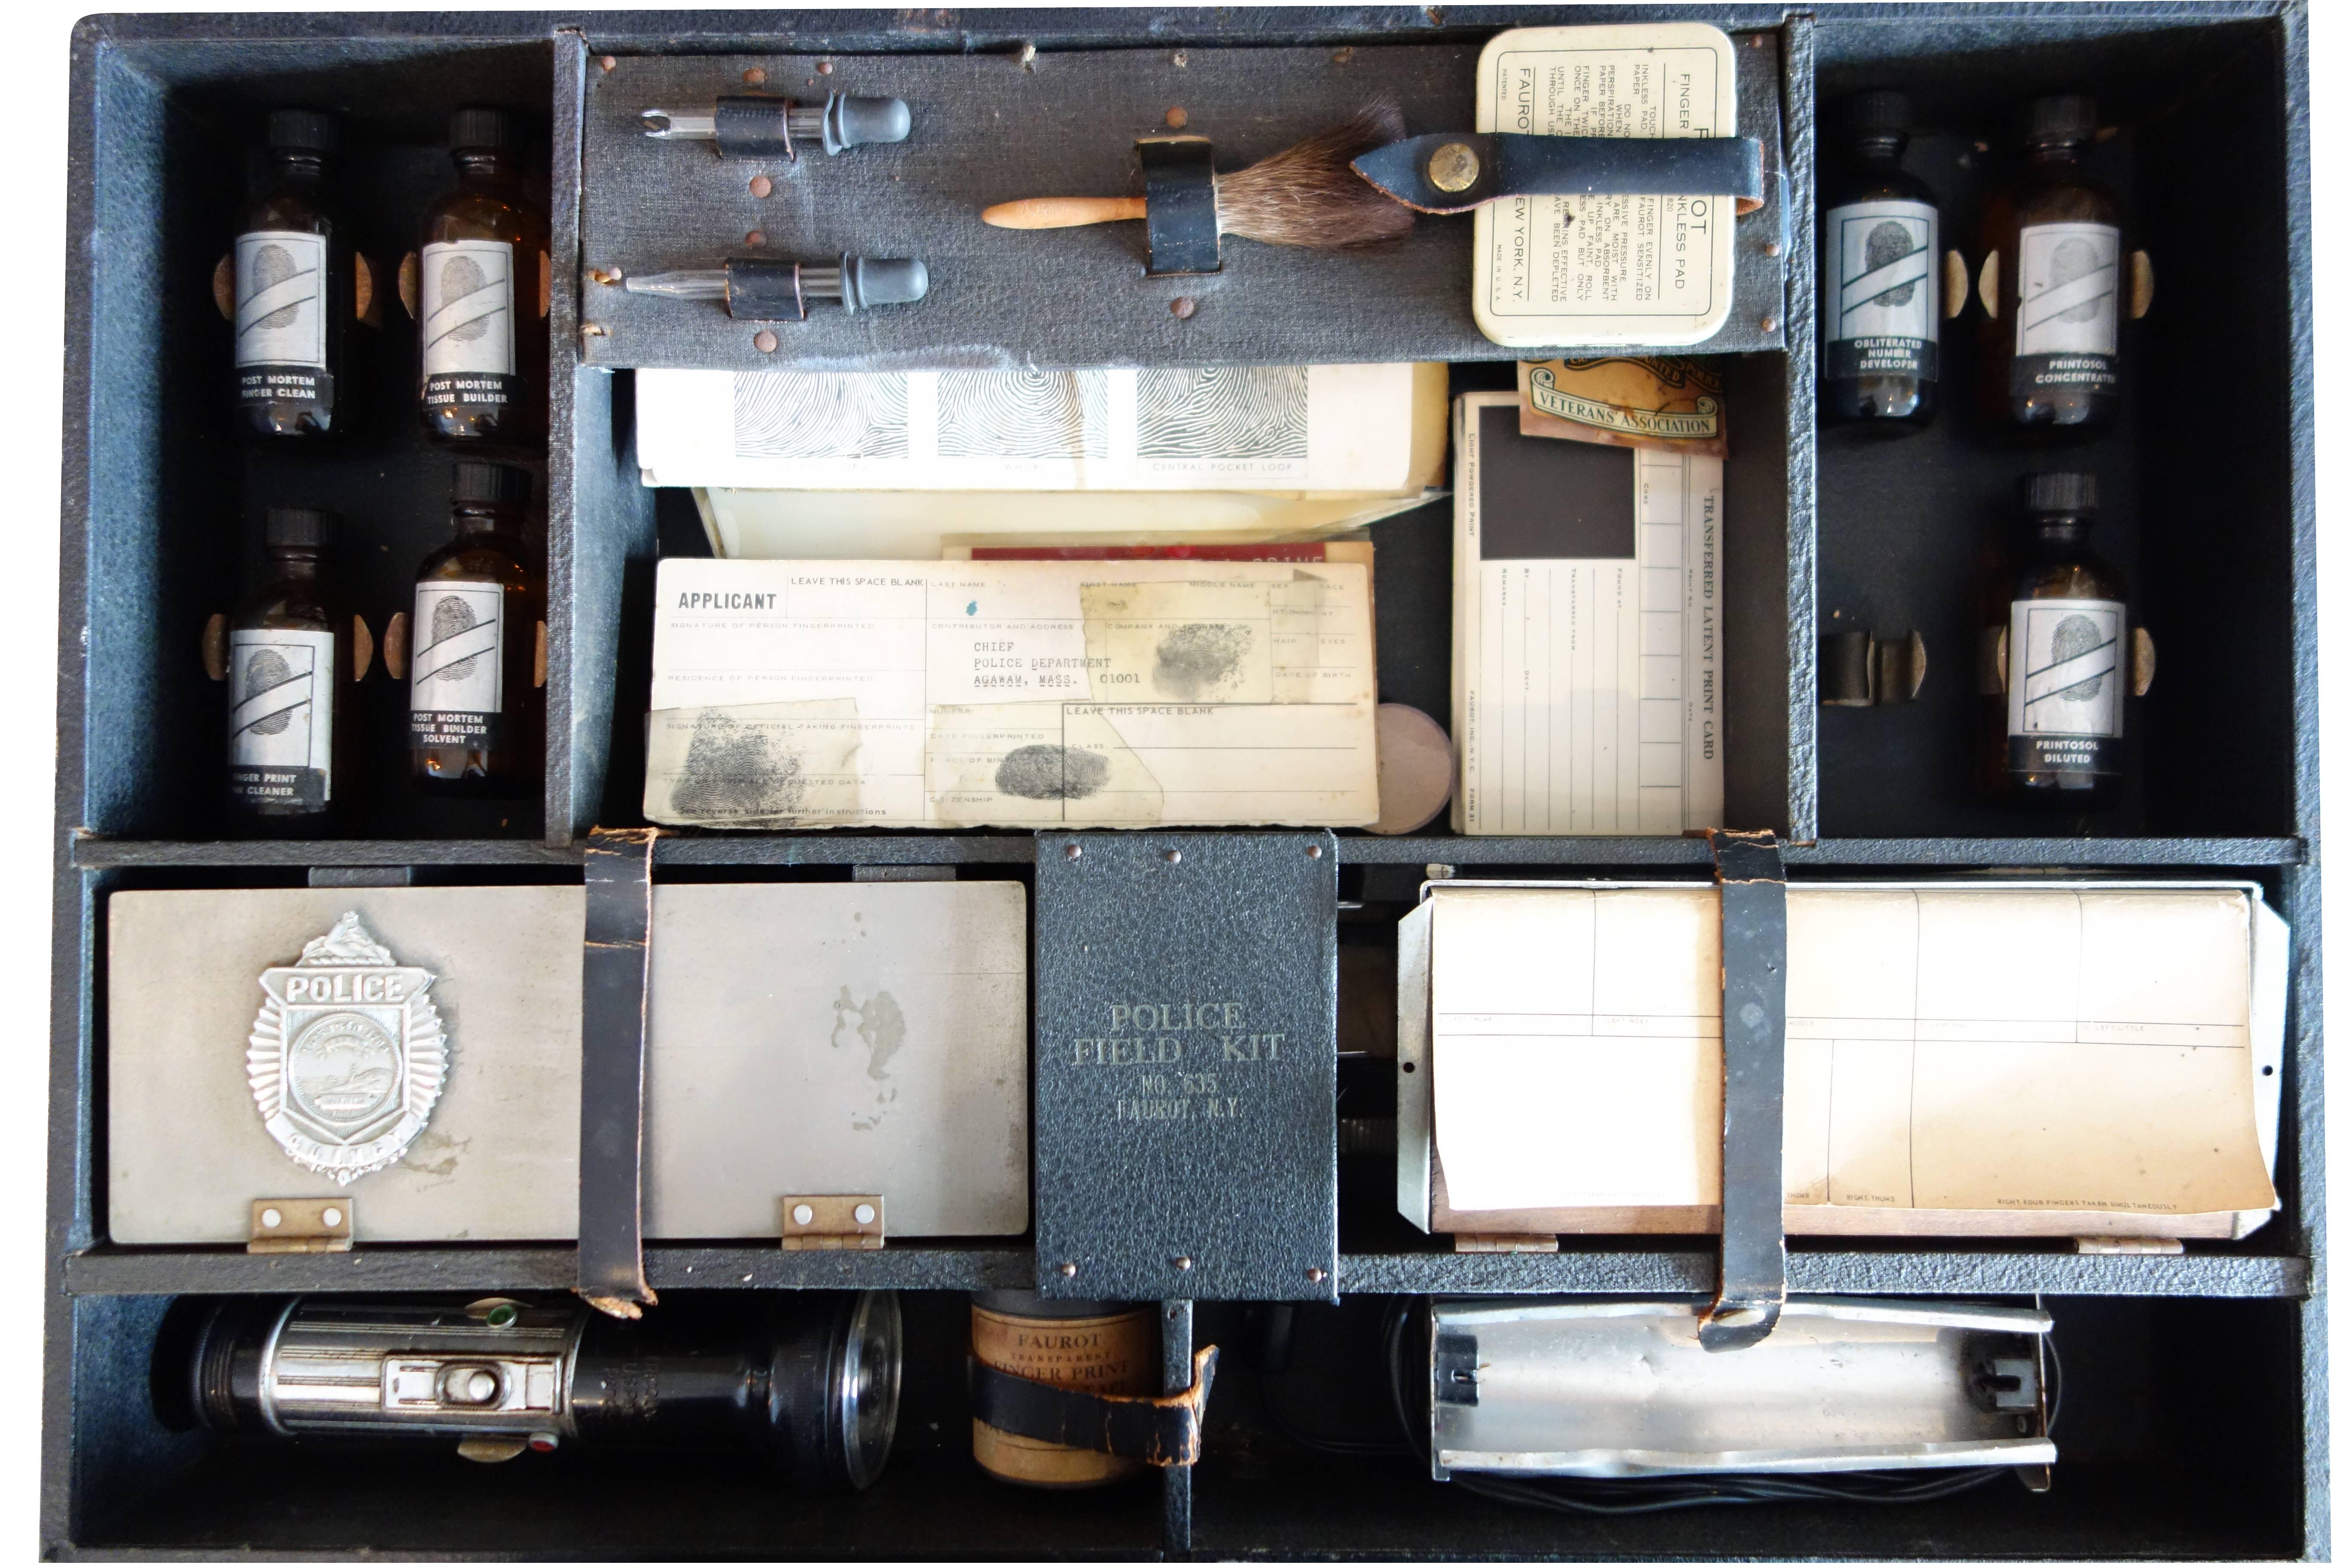 Police Detective Crime Scene Kit, Made by Farout Forensic Products, Massachusett 2